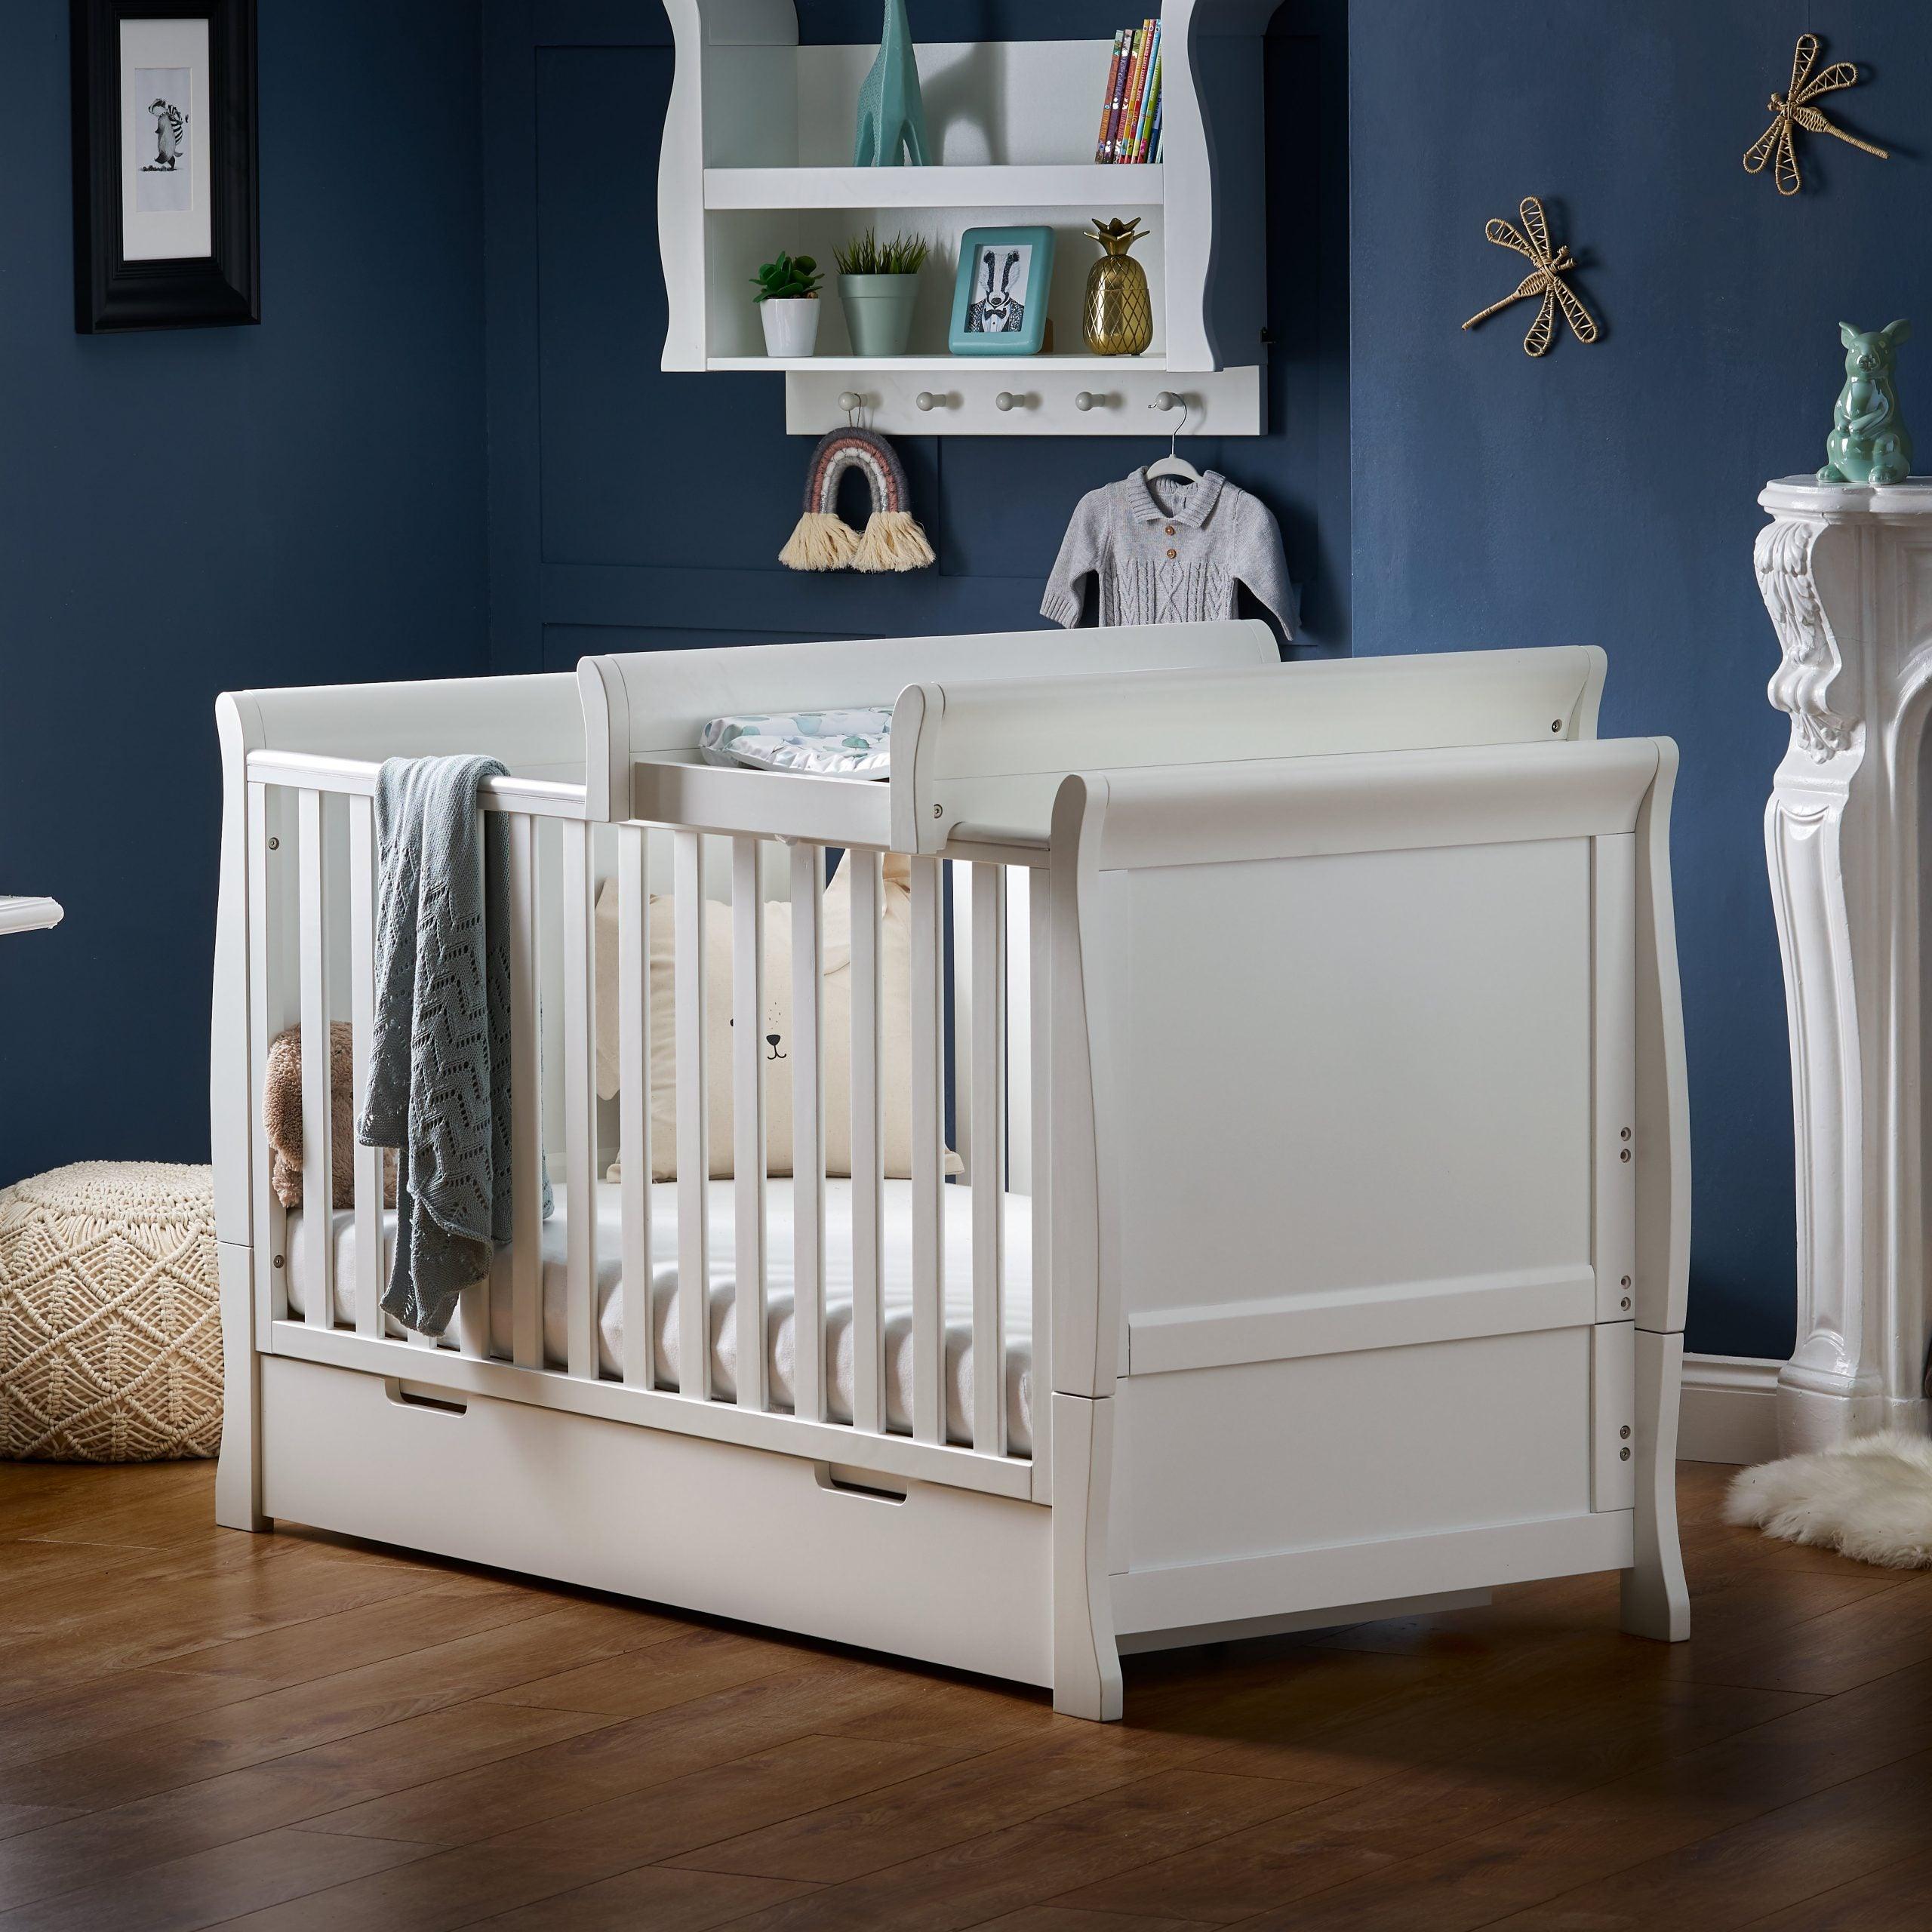 View Stamford Cot Top Changer White information